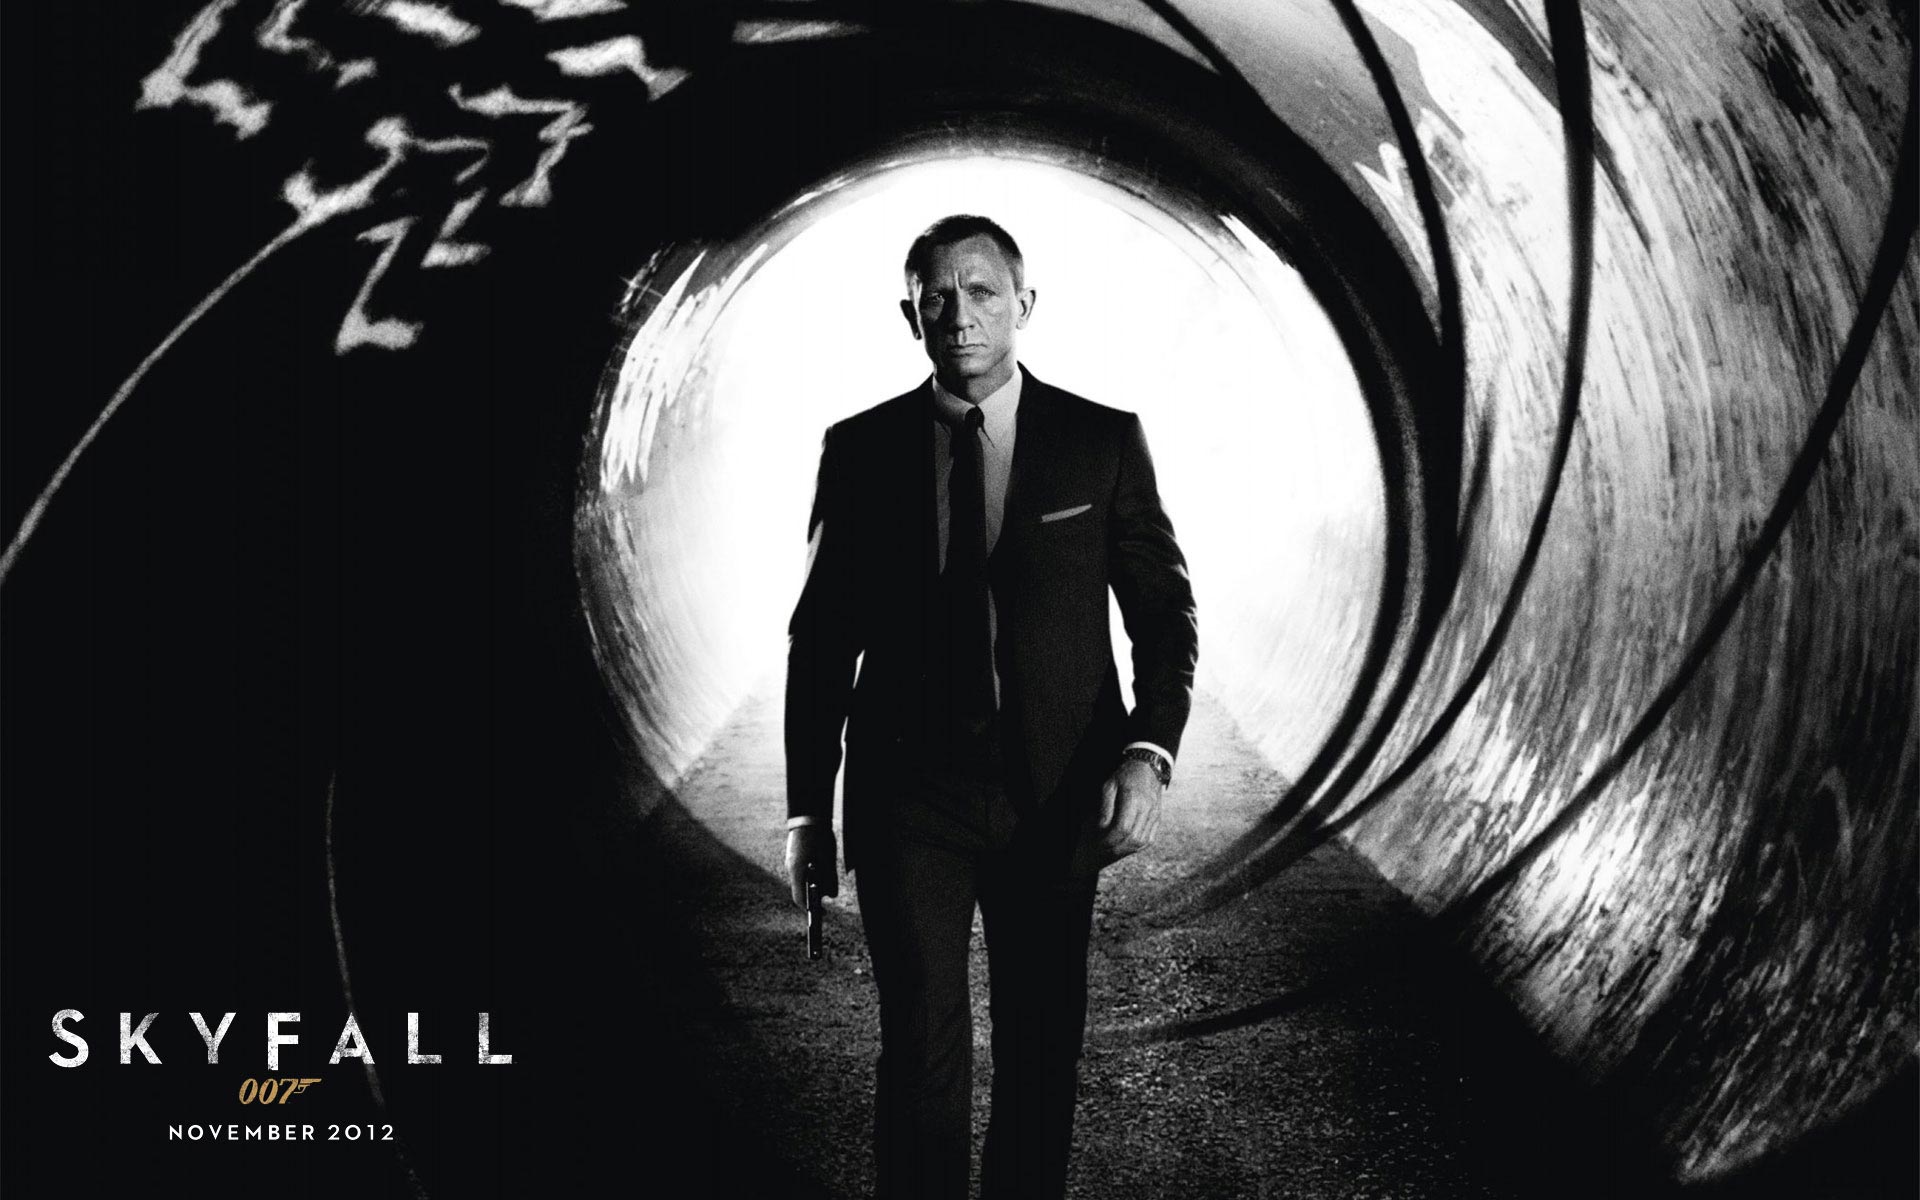 skyfall wallpaper,darkness,black and white,photography,movie,album cover